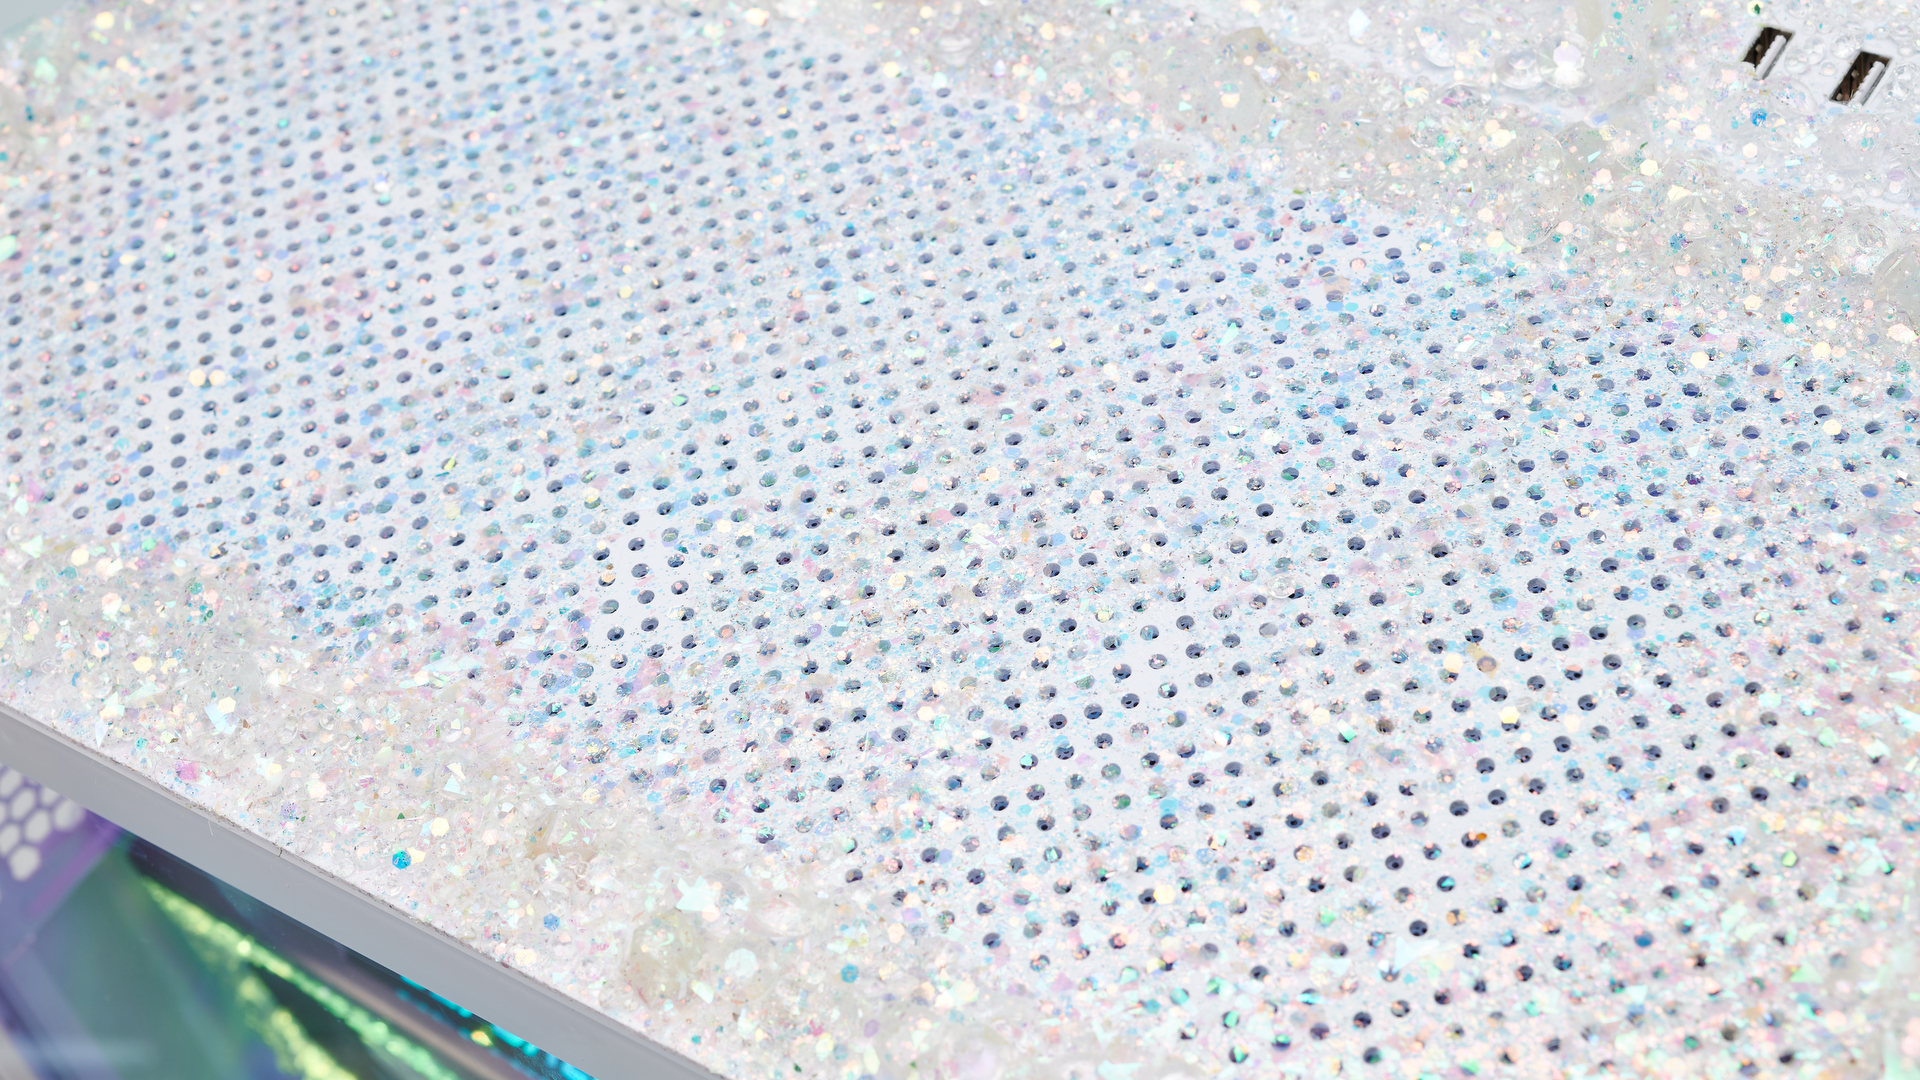 Glittery surface of the Crystal PC